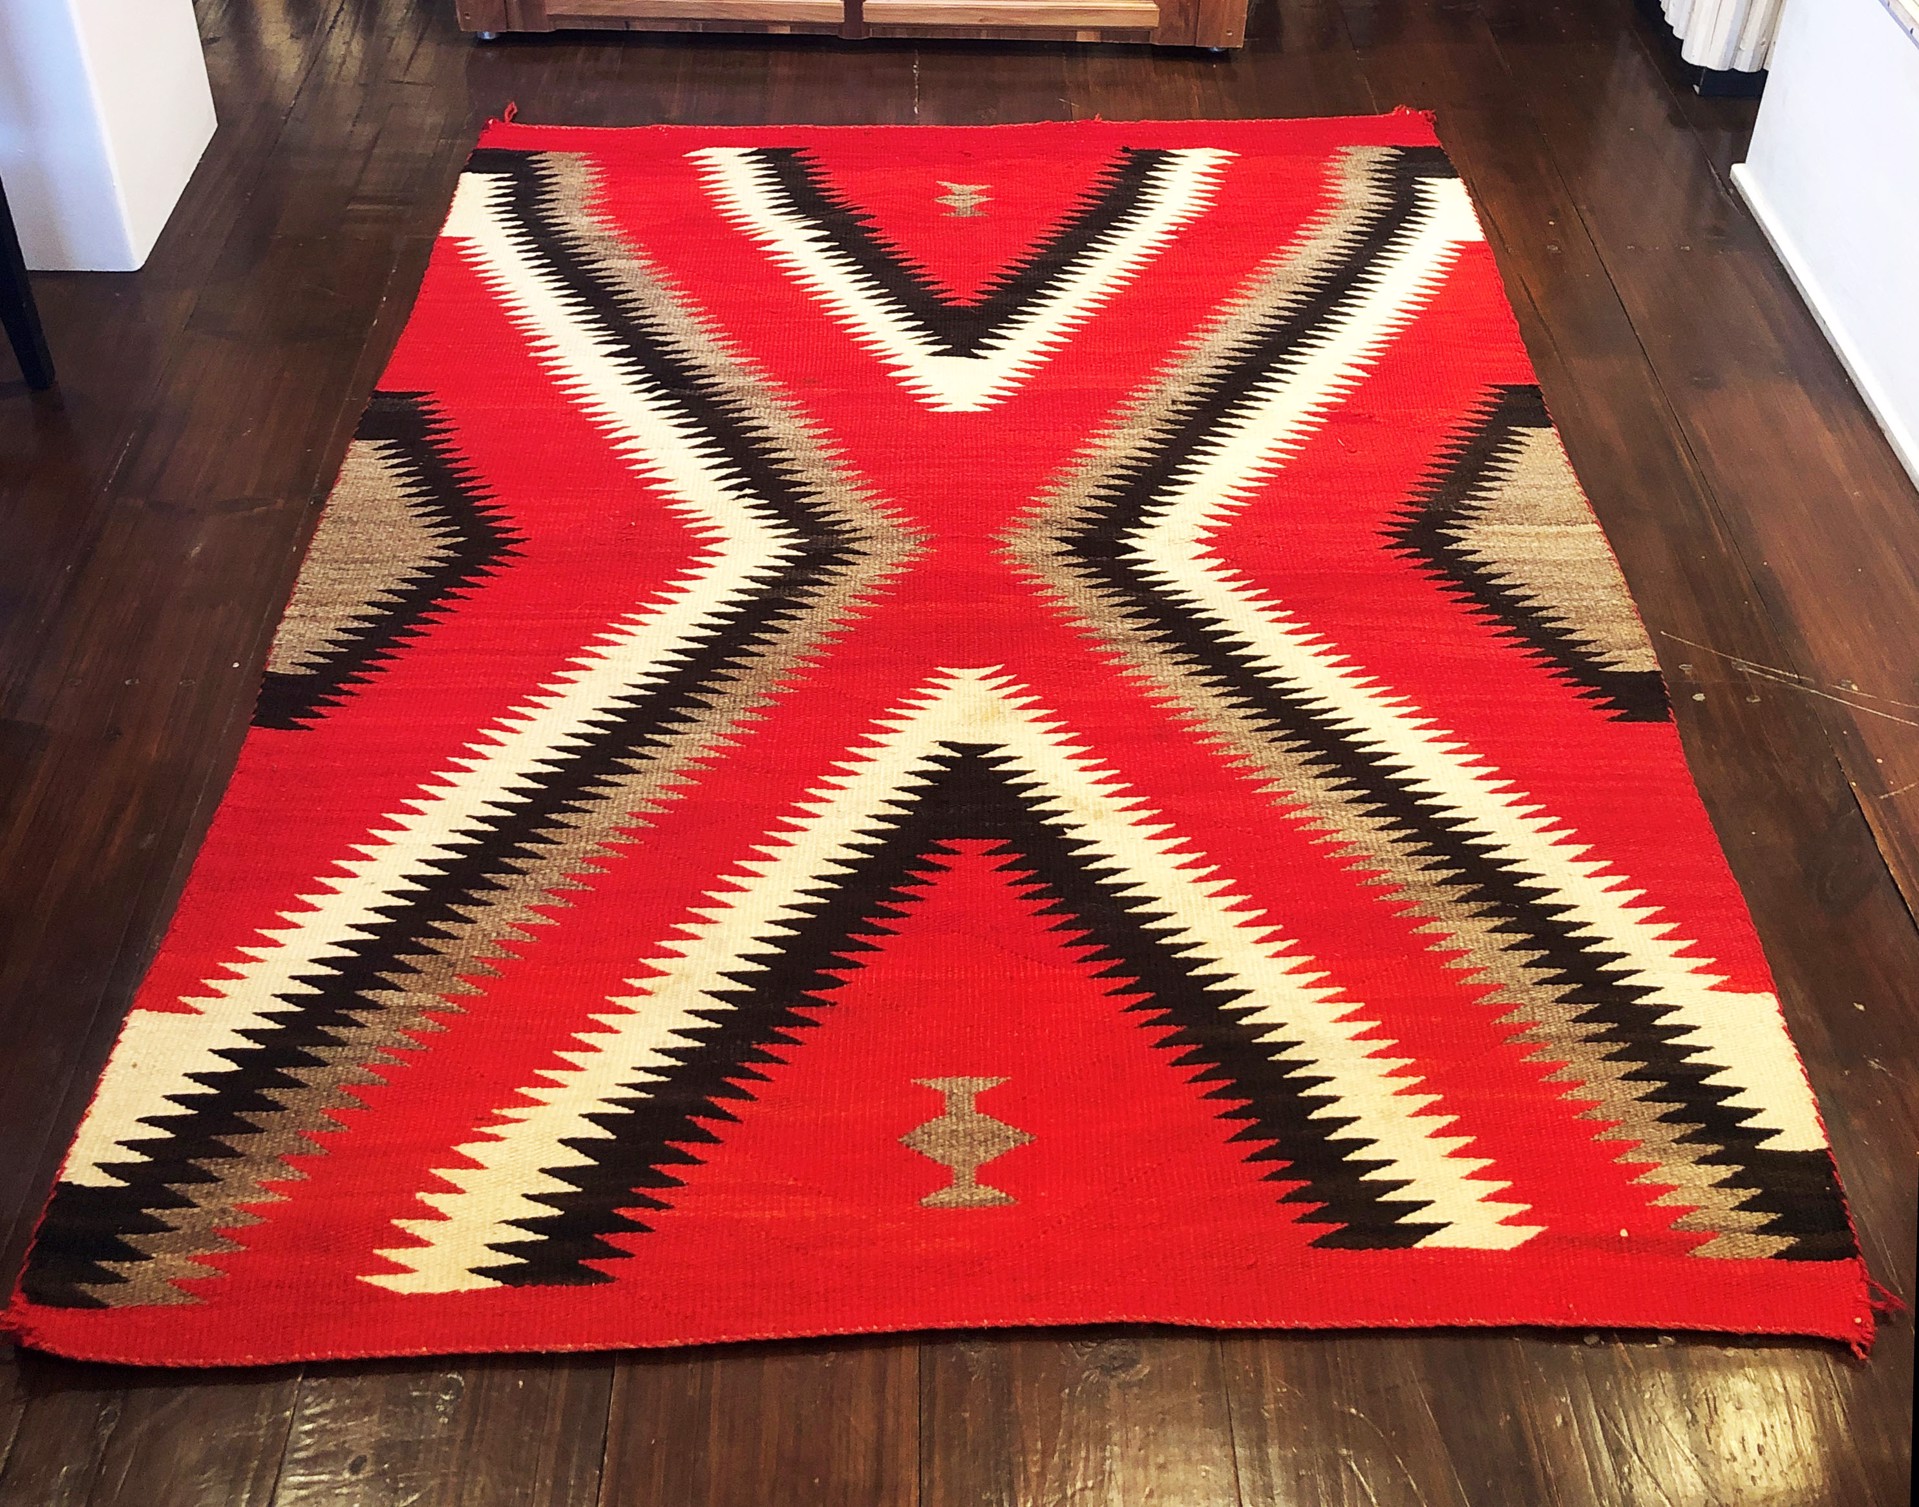 Antique Navajo Rug with Red, White, Black and Grey Geometric Design by Artist Unknown